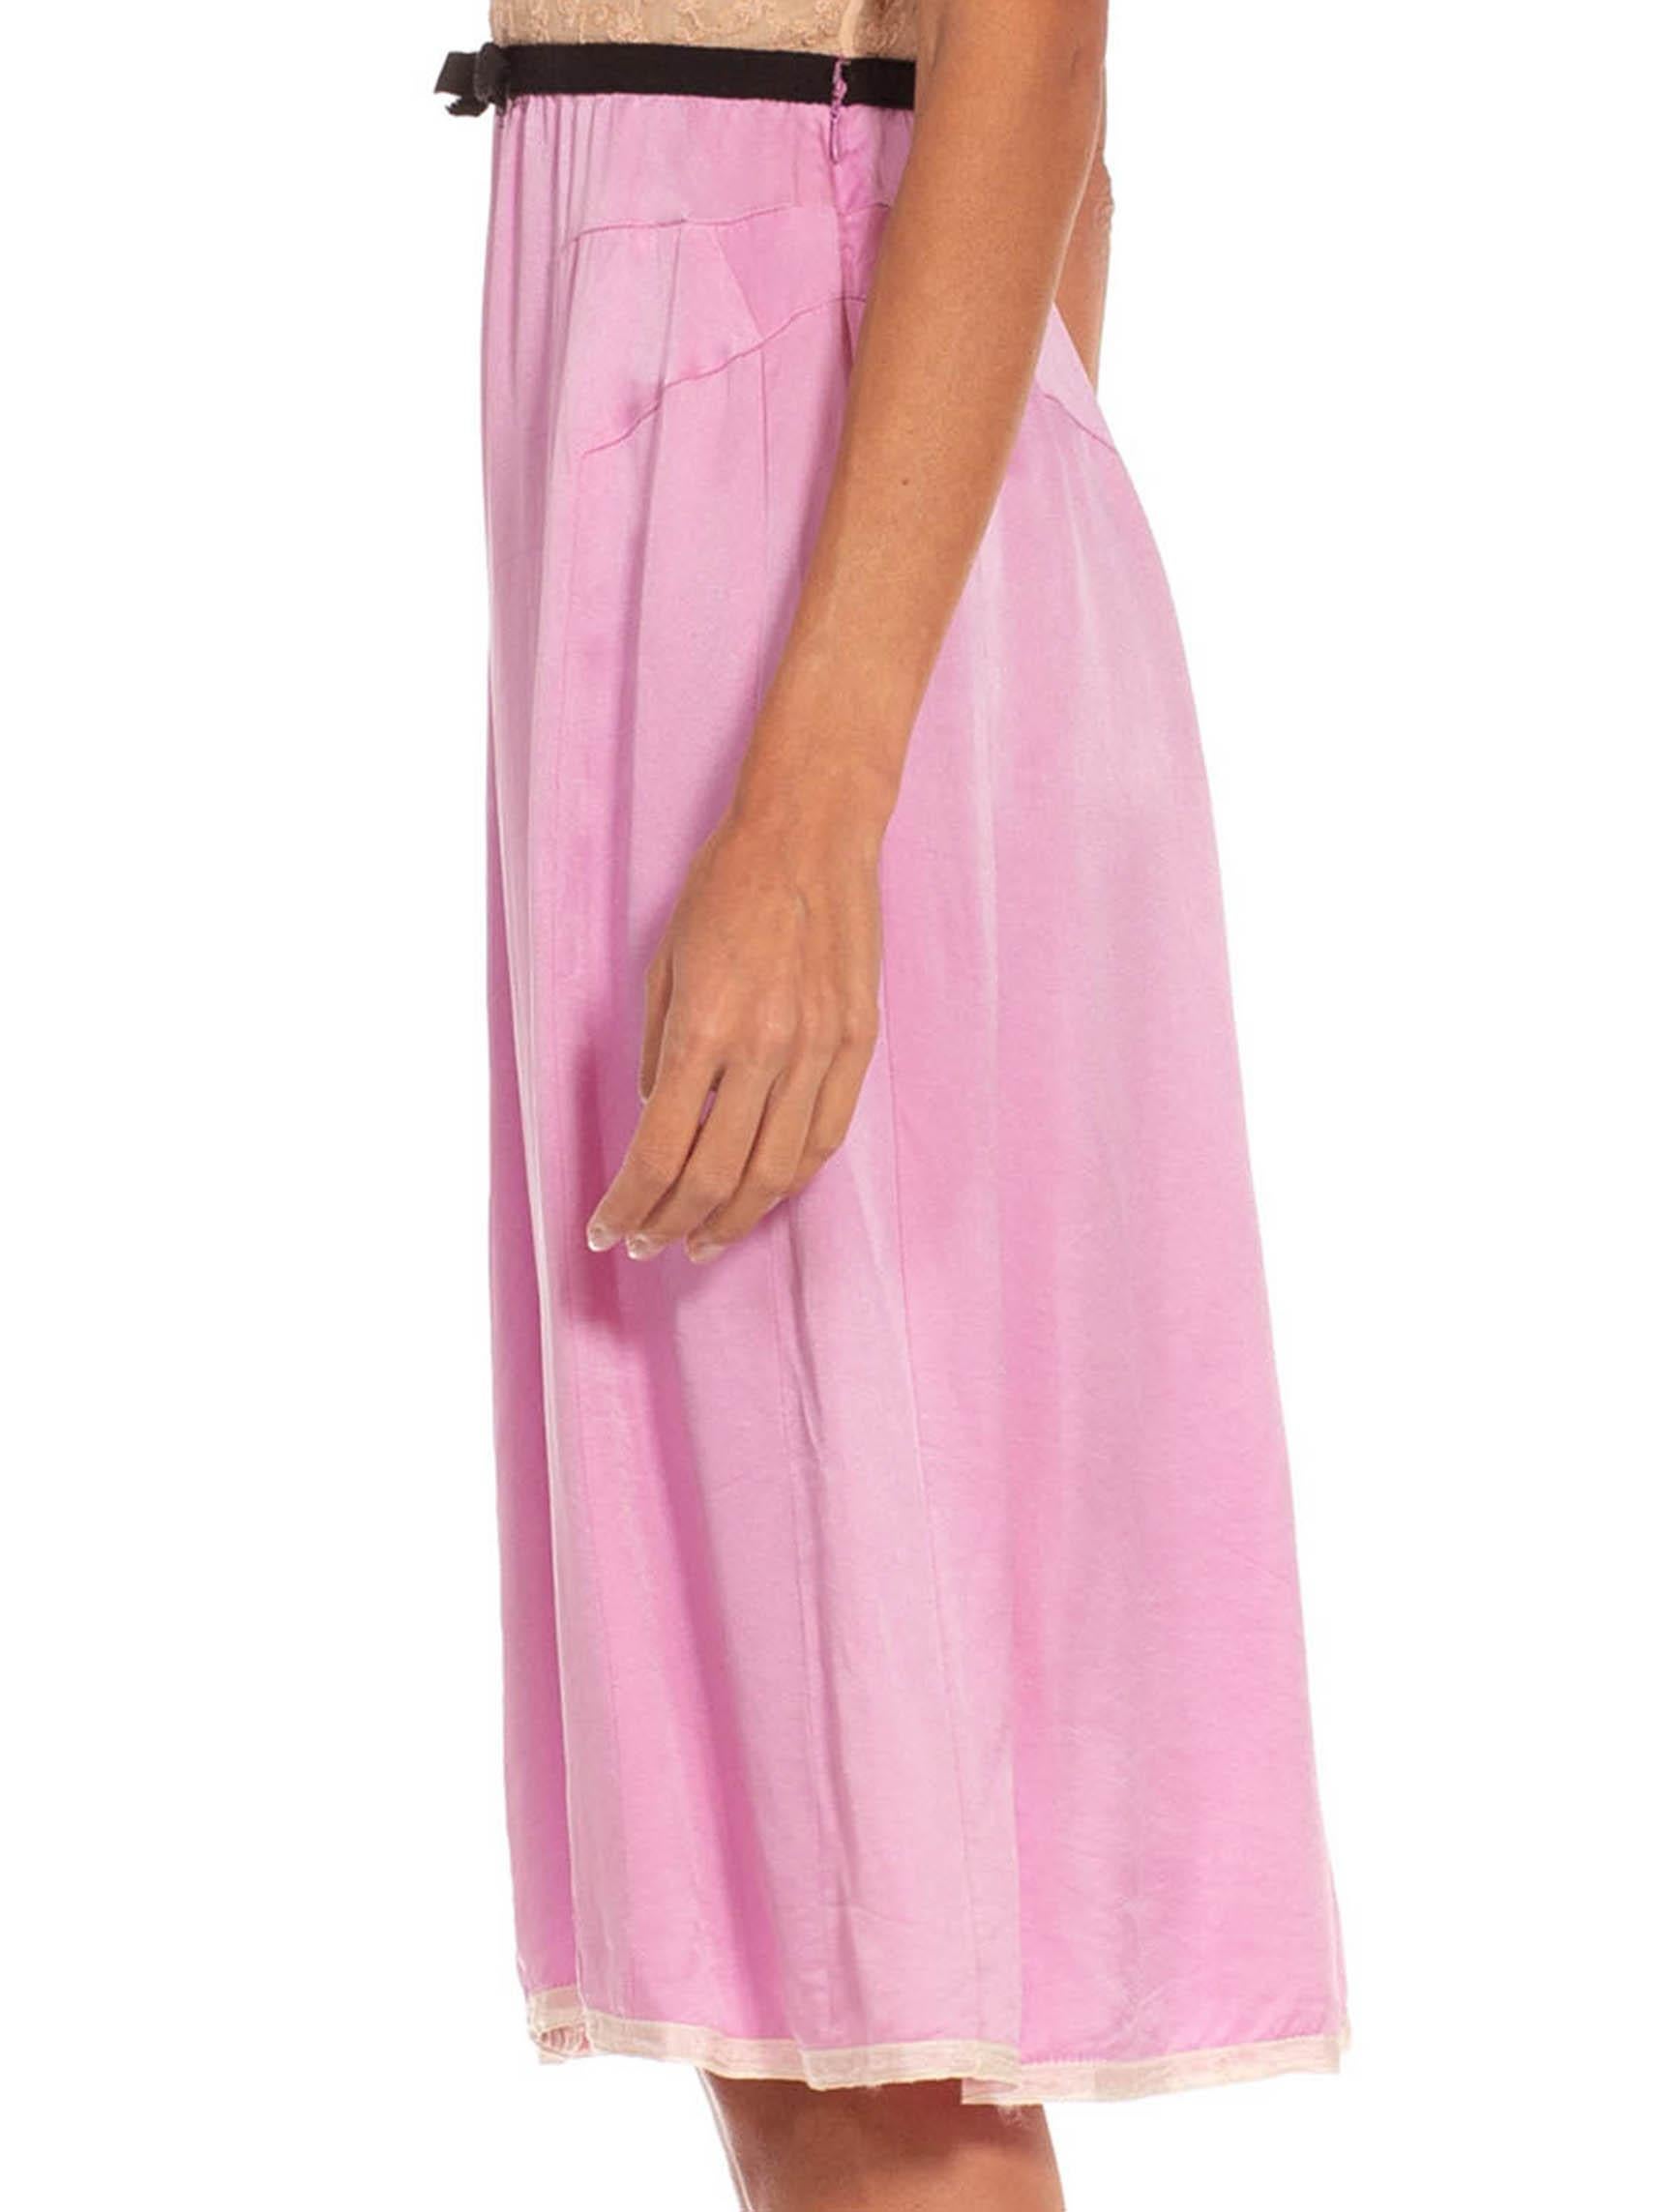 This dress has an intentional washed and rumpled grunge appearance as is common in Marc's earlier work. 2000S MARC JACOBS Lilac Silk & Lace Boho Grunge Slip Dress 